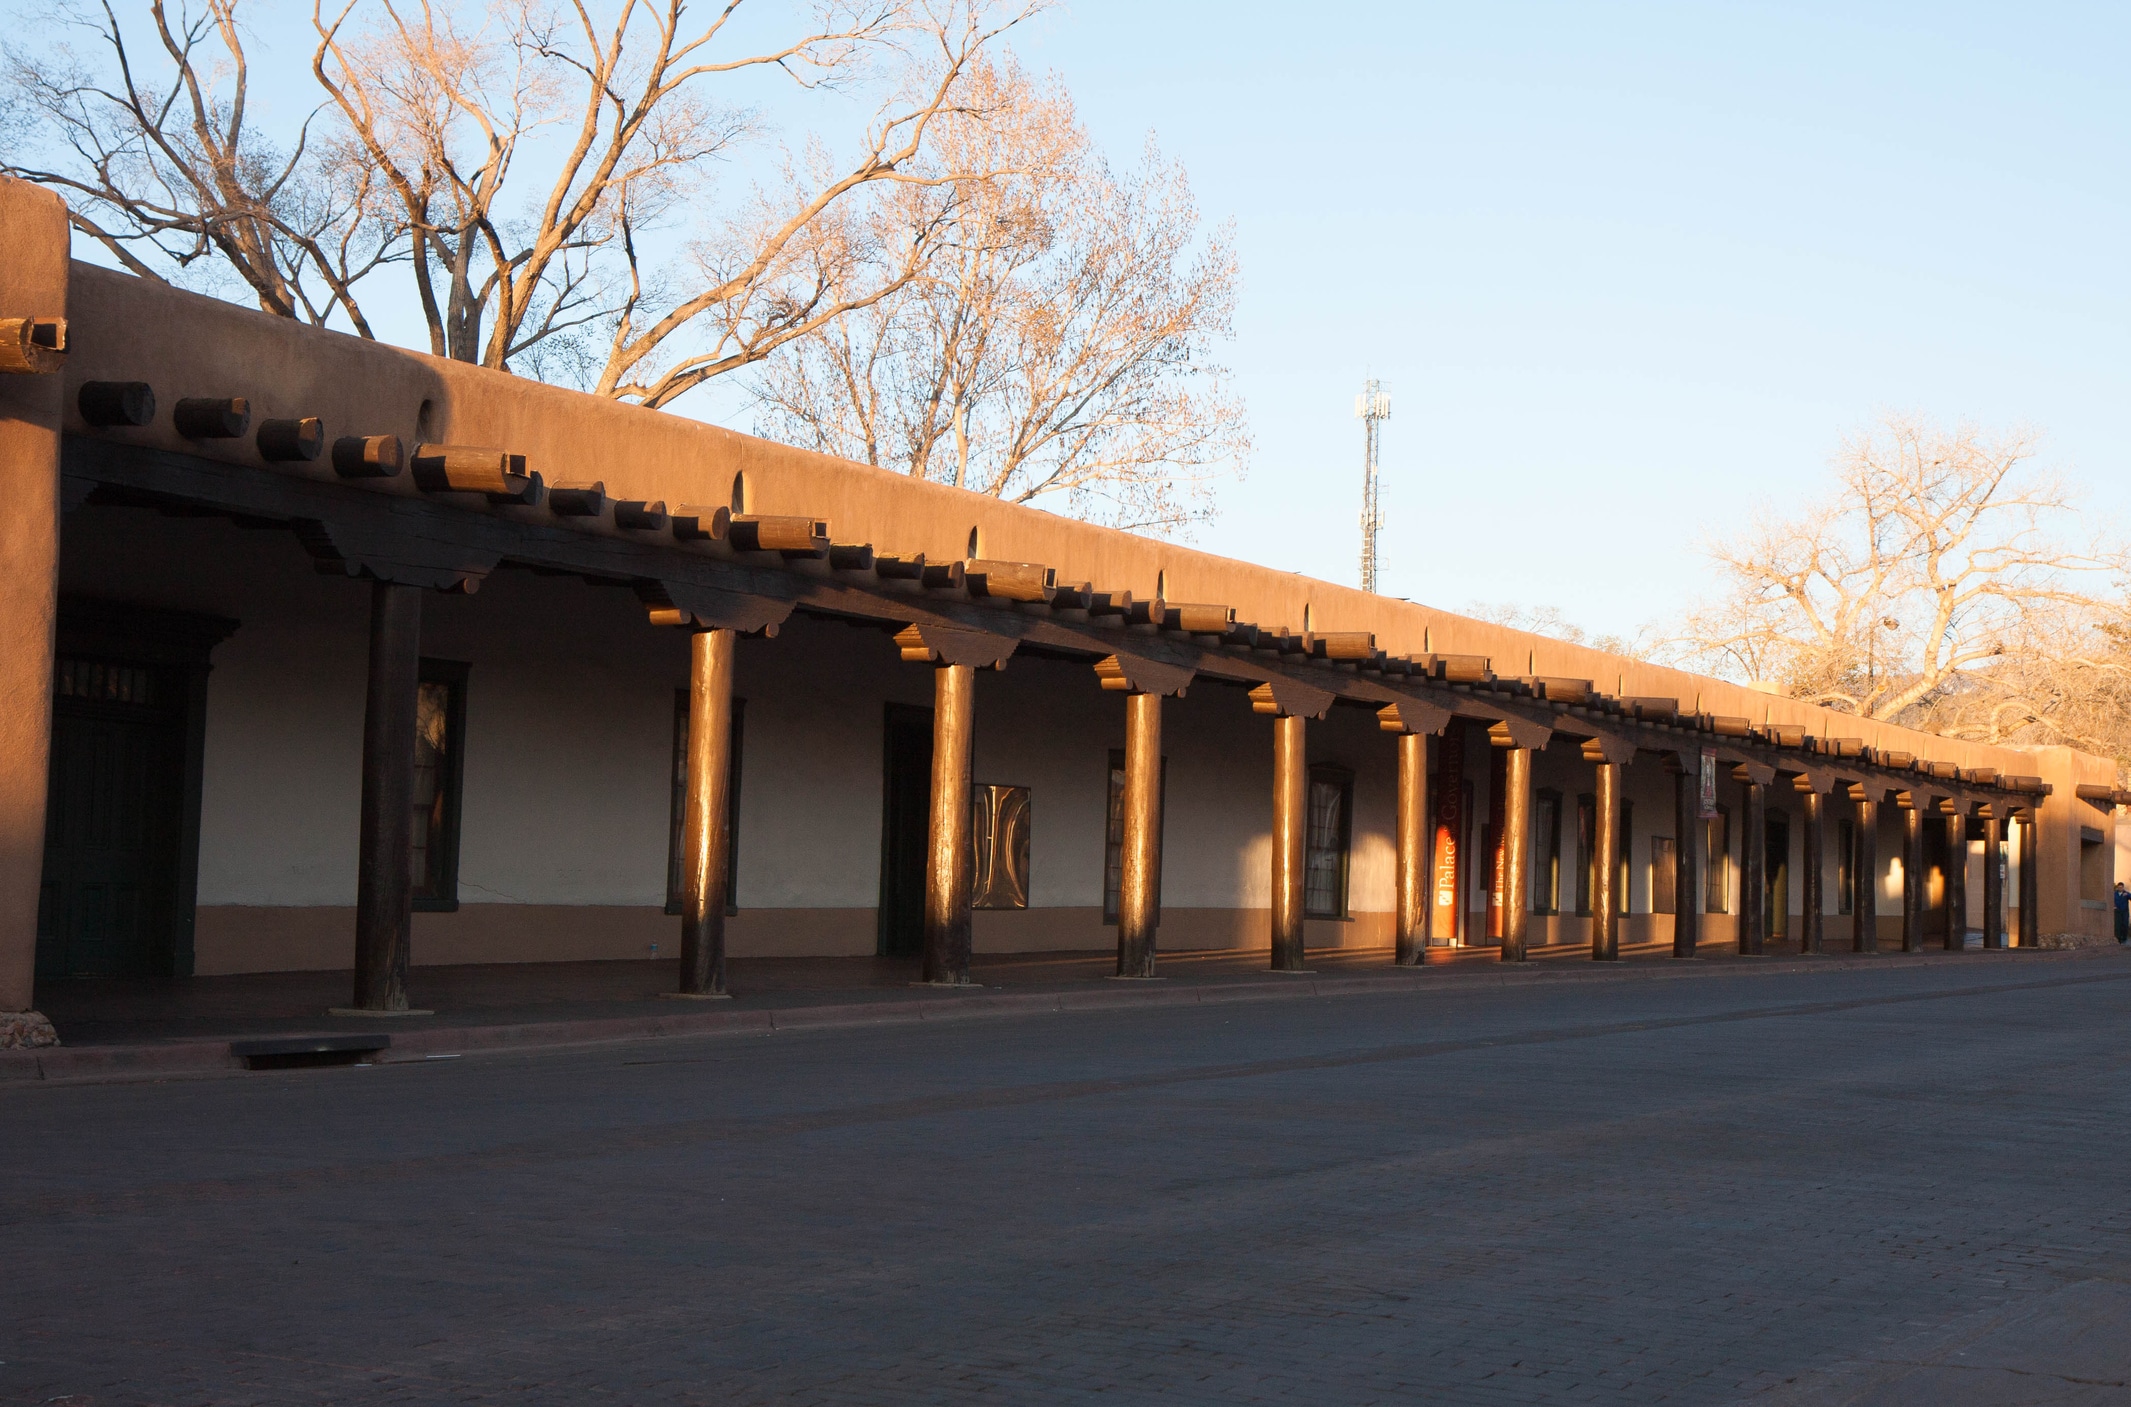 One of the oldest buildings in America, dating back to 1610, the Palace of the Governors hosts a daily Native American Market. Photograph shot at sunset, trees in background, no people visible.